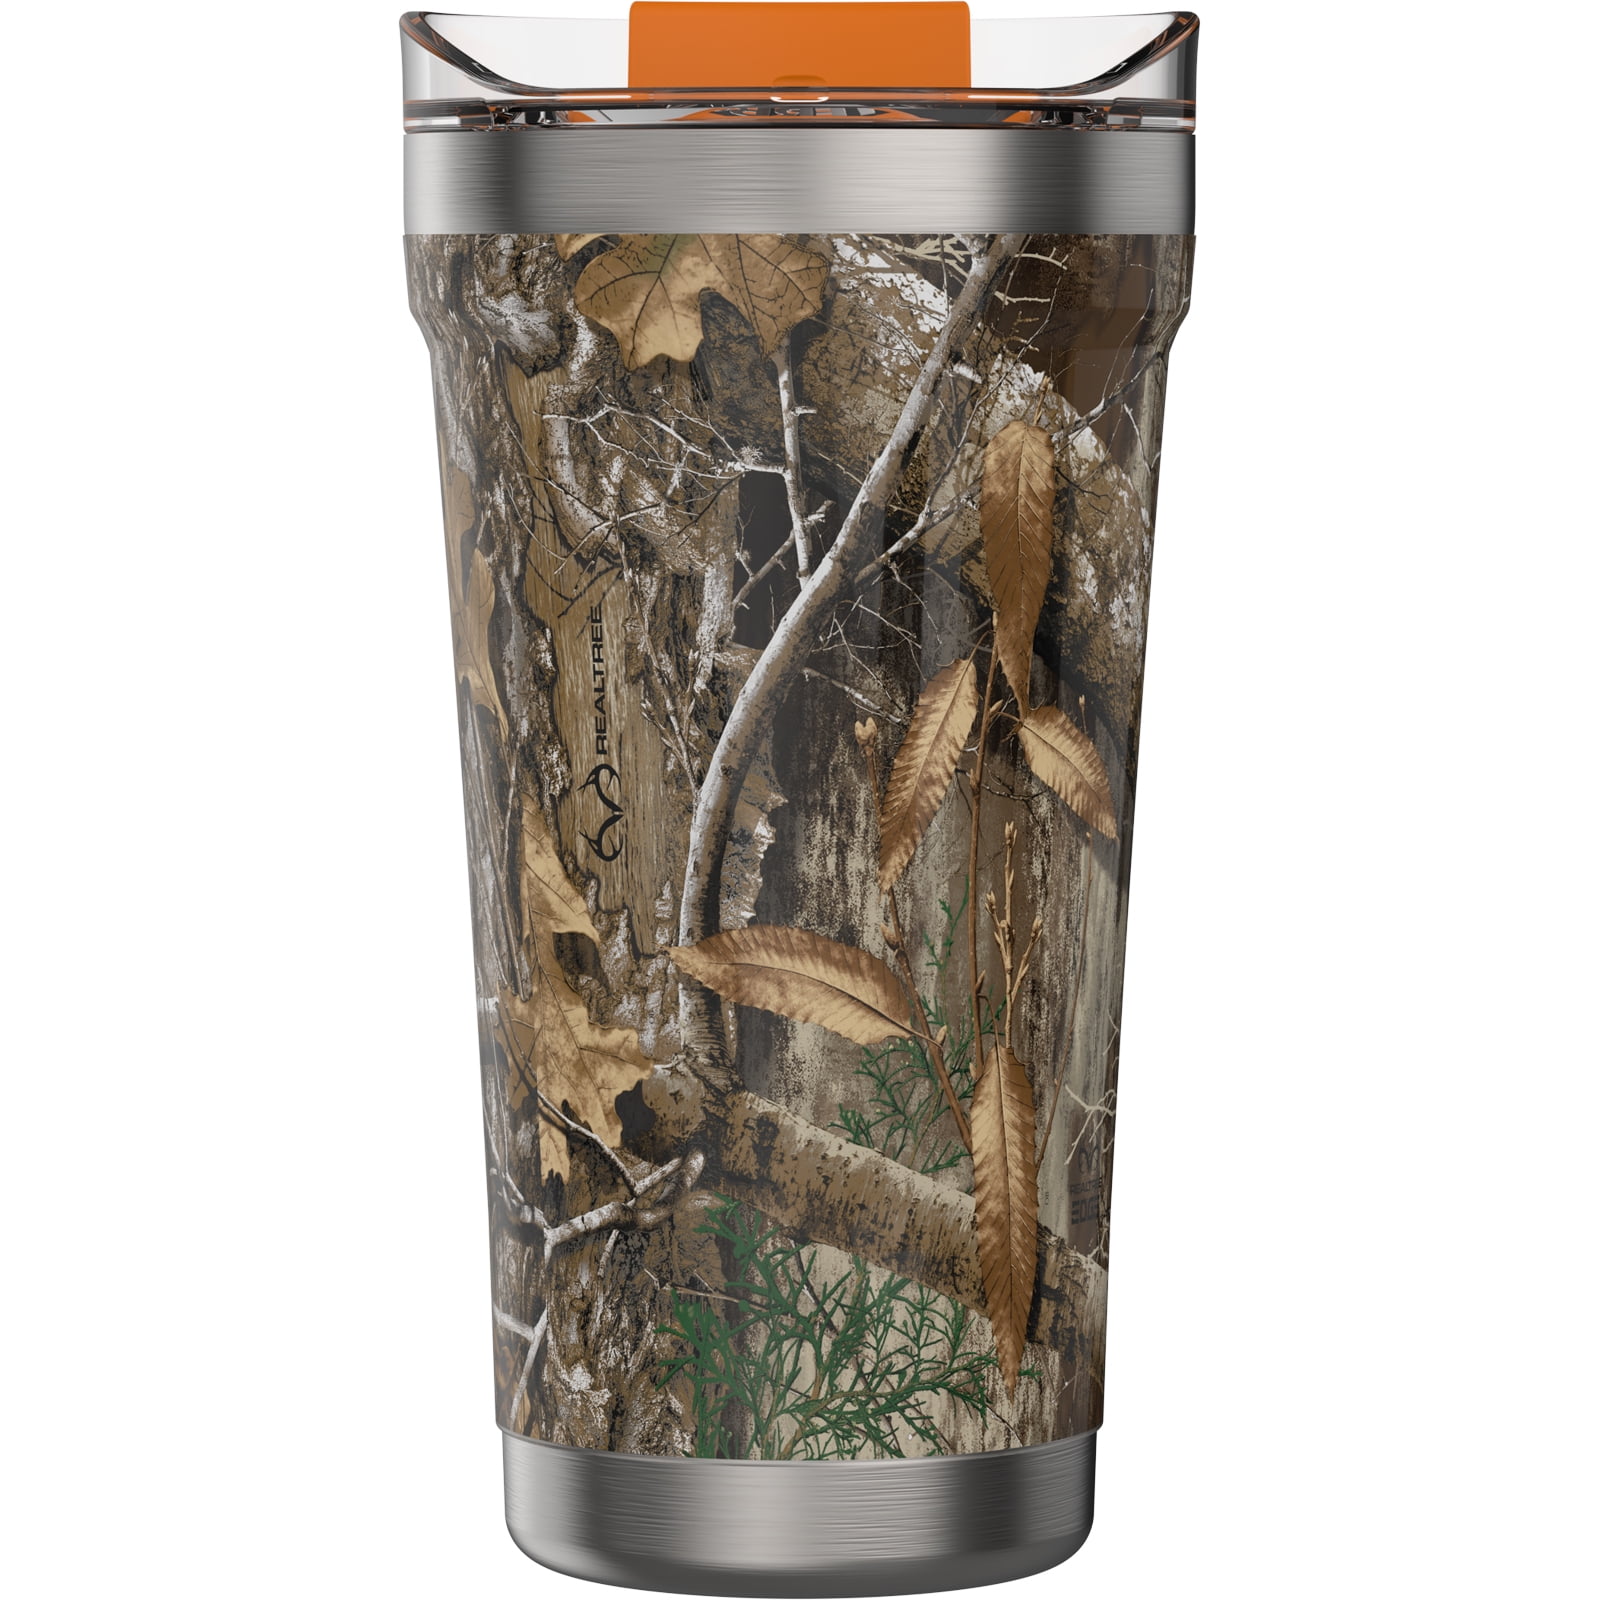 Marketing Otterbox Elevation Stainless Steel Tumblers (10 Oz